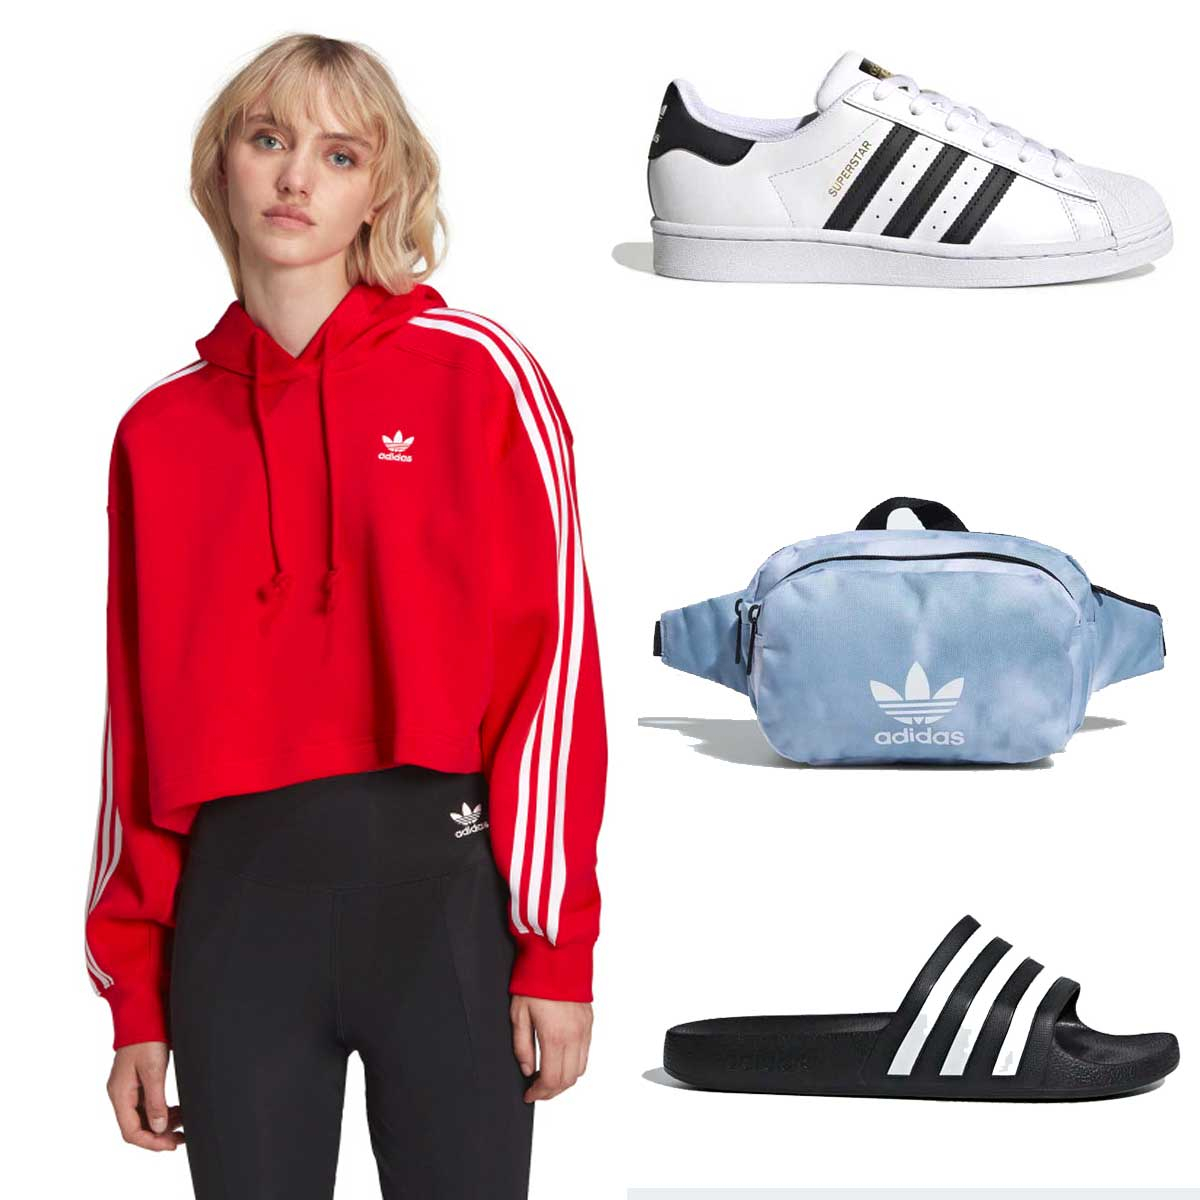 Adidas End of Season Deals: Up to 60% Off Clothes, Shoes & More